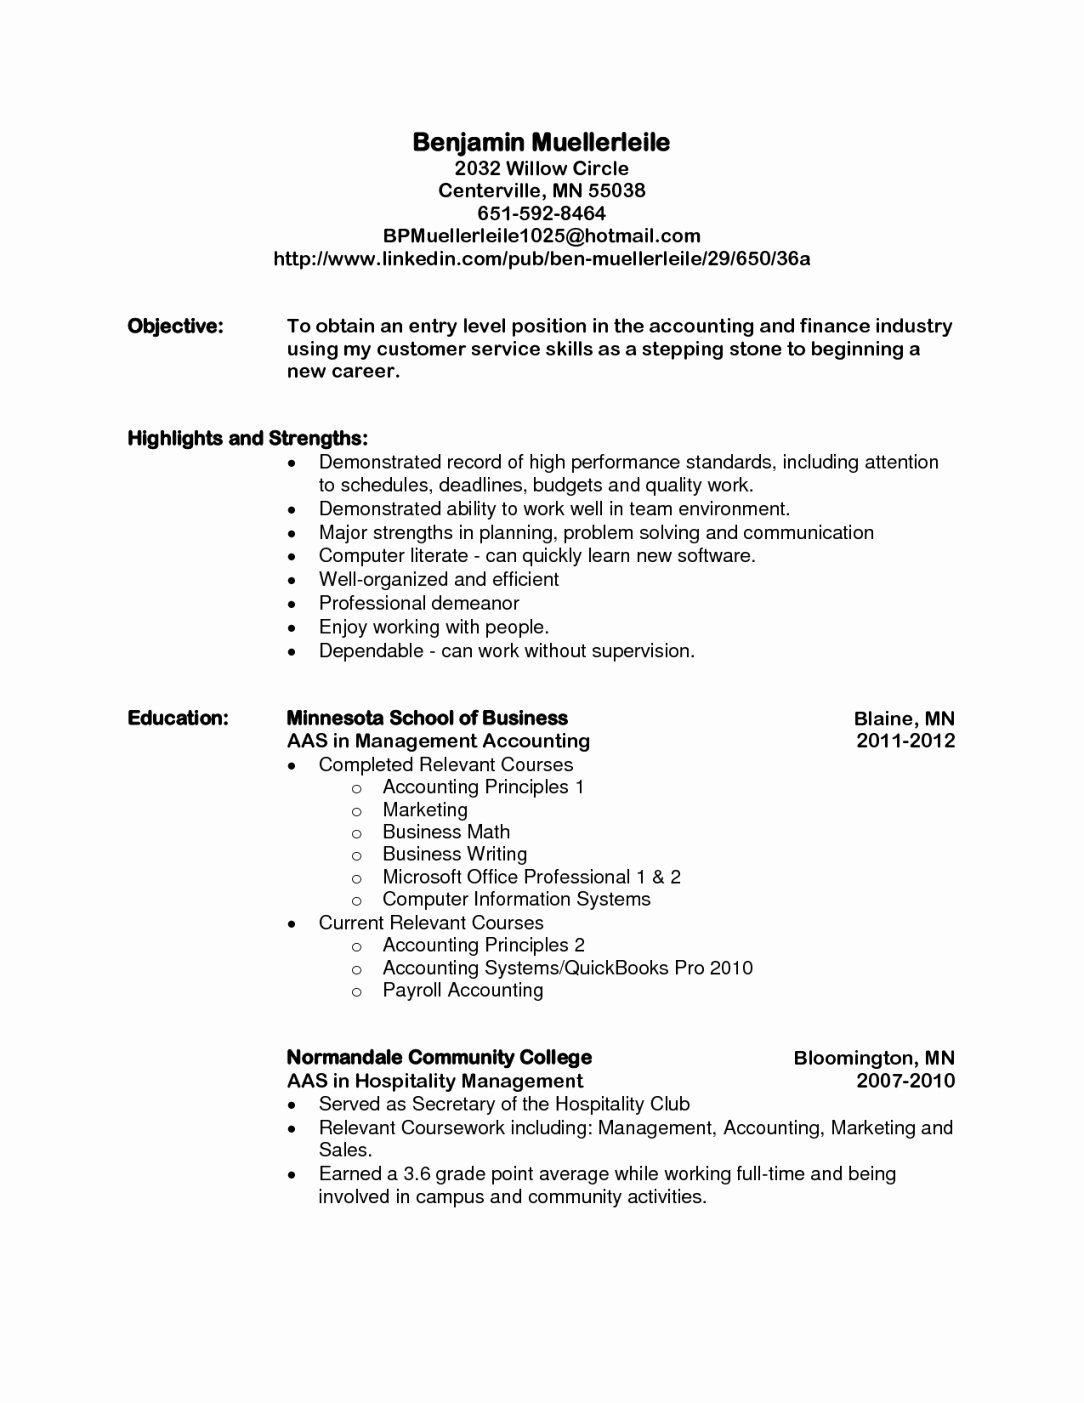 Resume Objectives Example for Level Entry Job – Perfect